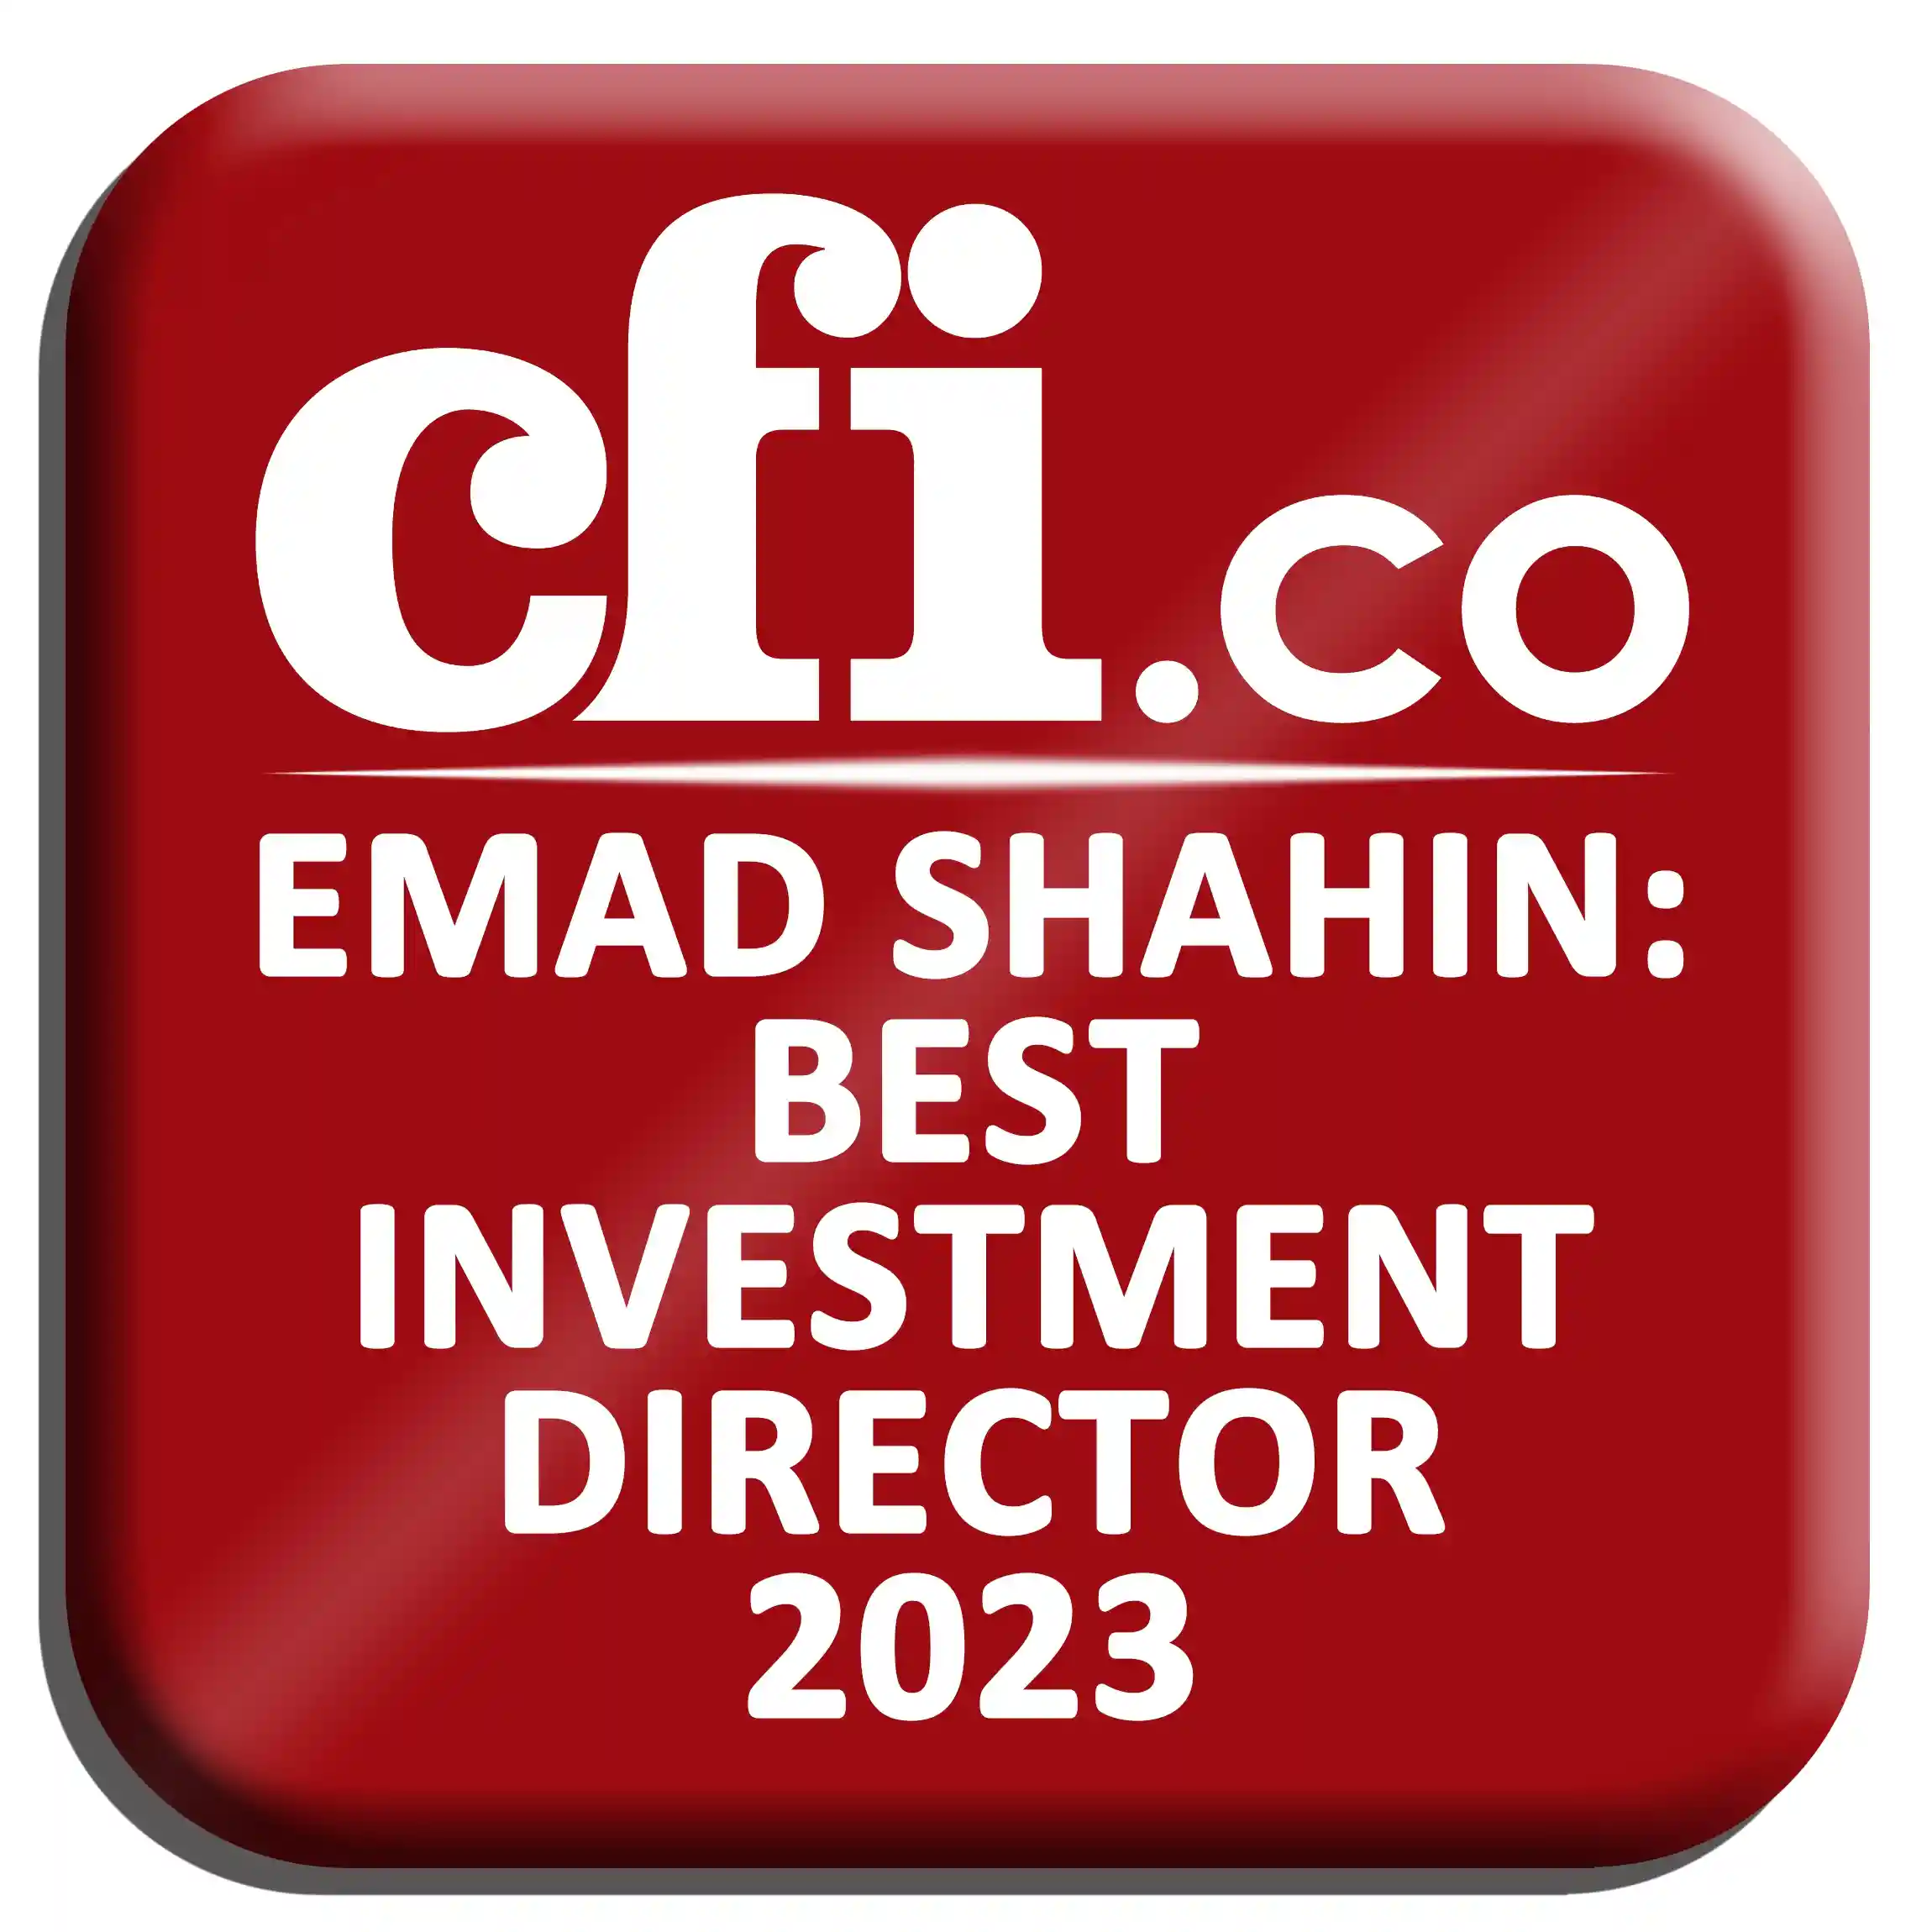 Emad Shahin: Best Investment Director 2023